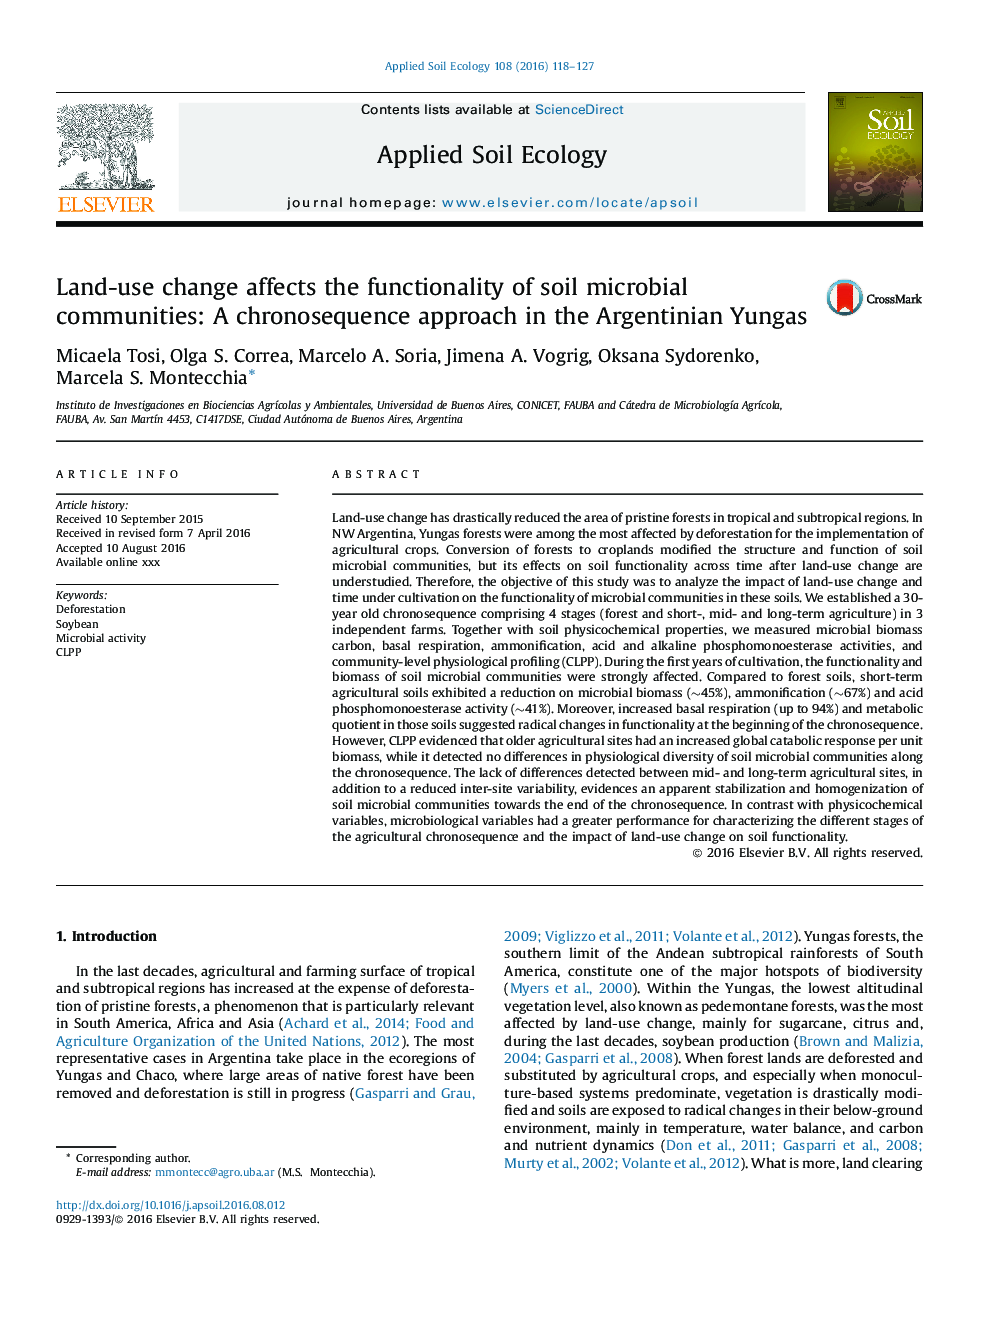 Land-use change affects the functionality of soil microbial communities: A chronosequence approach in the Argentinian Yungas